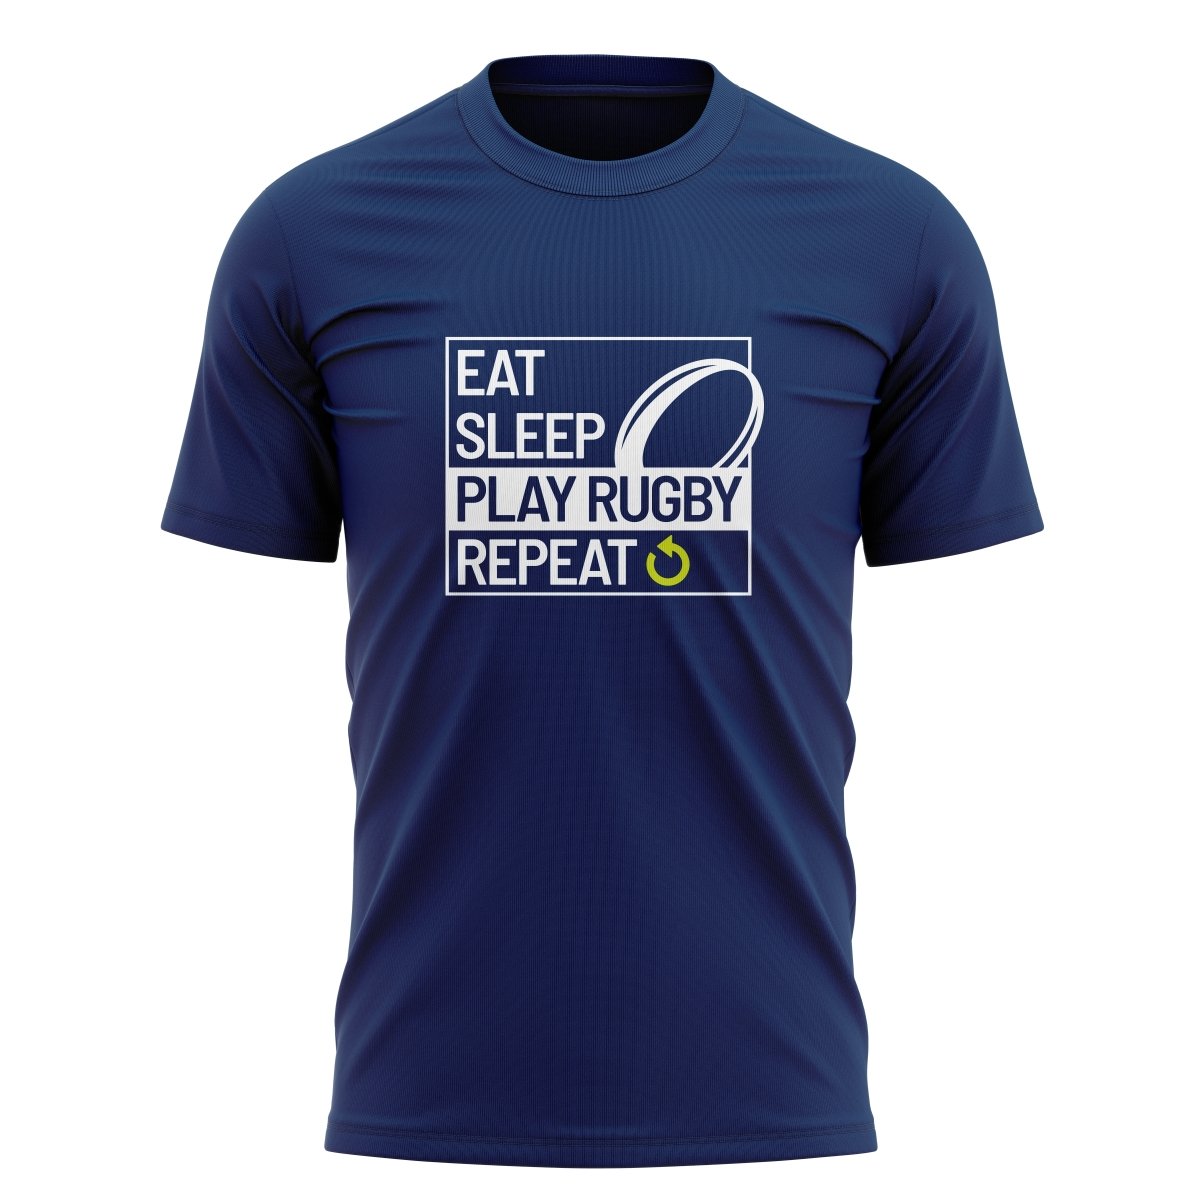 Eat Sleep Rugby Graphic Tee - www.therugbyshop.com www.therugbyshop.com MEN&#39;S / NAVY / S SANMAR TEES Eat Sleep Rugby Graphic Tee